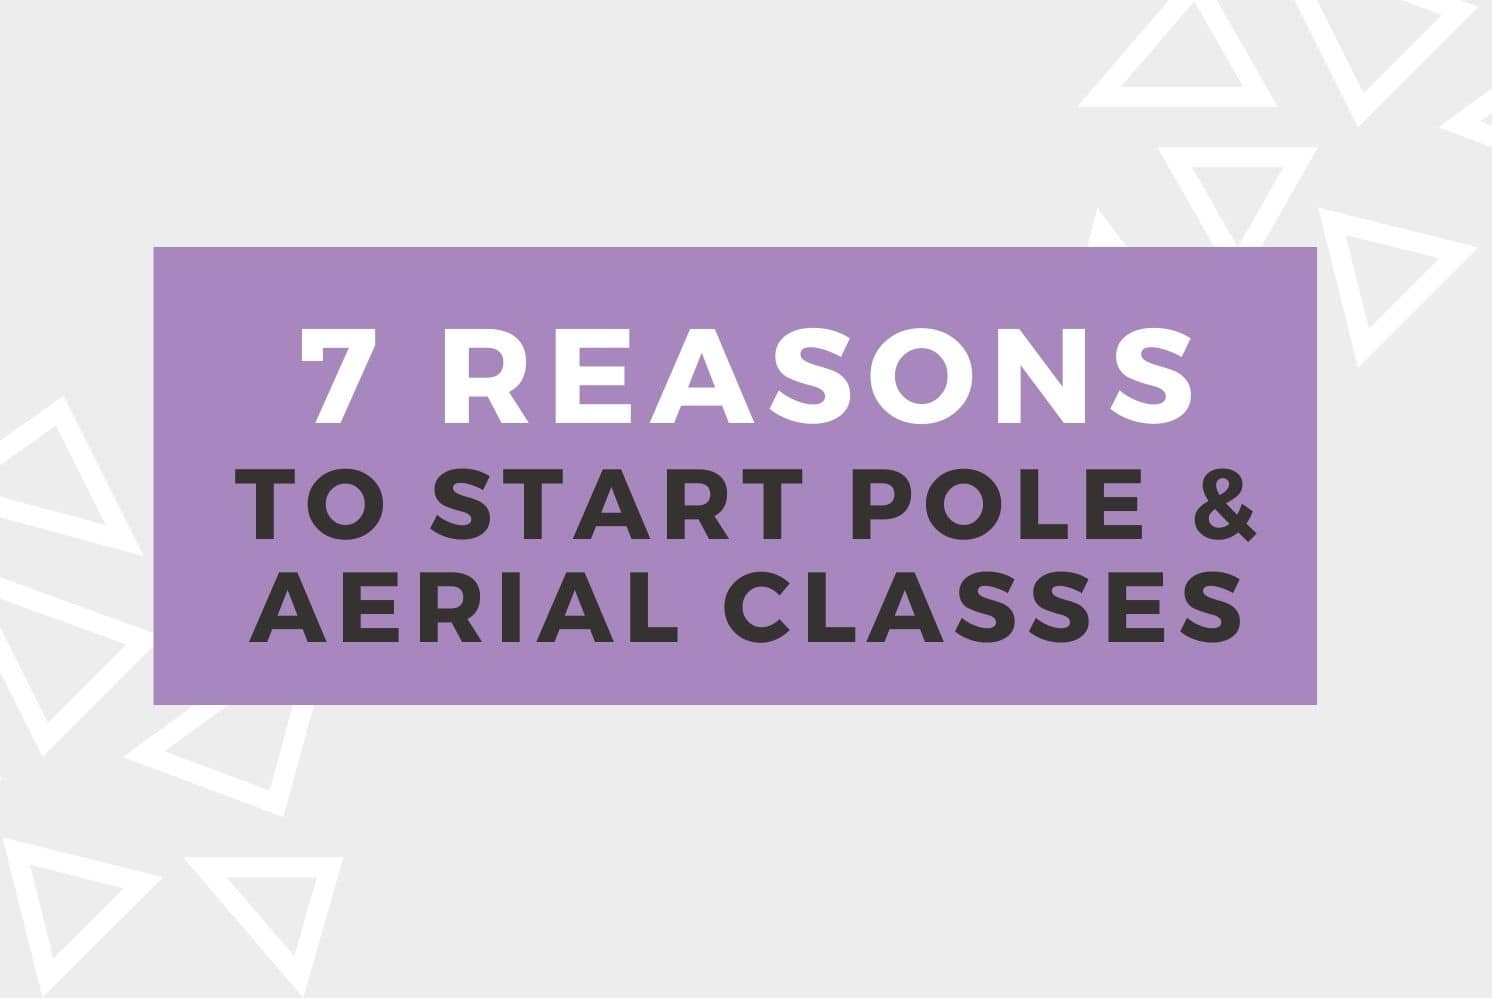 7 Reasons to Start Pole & Aerial Classes